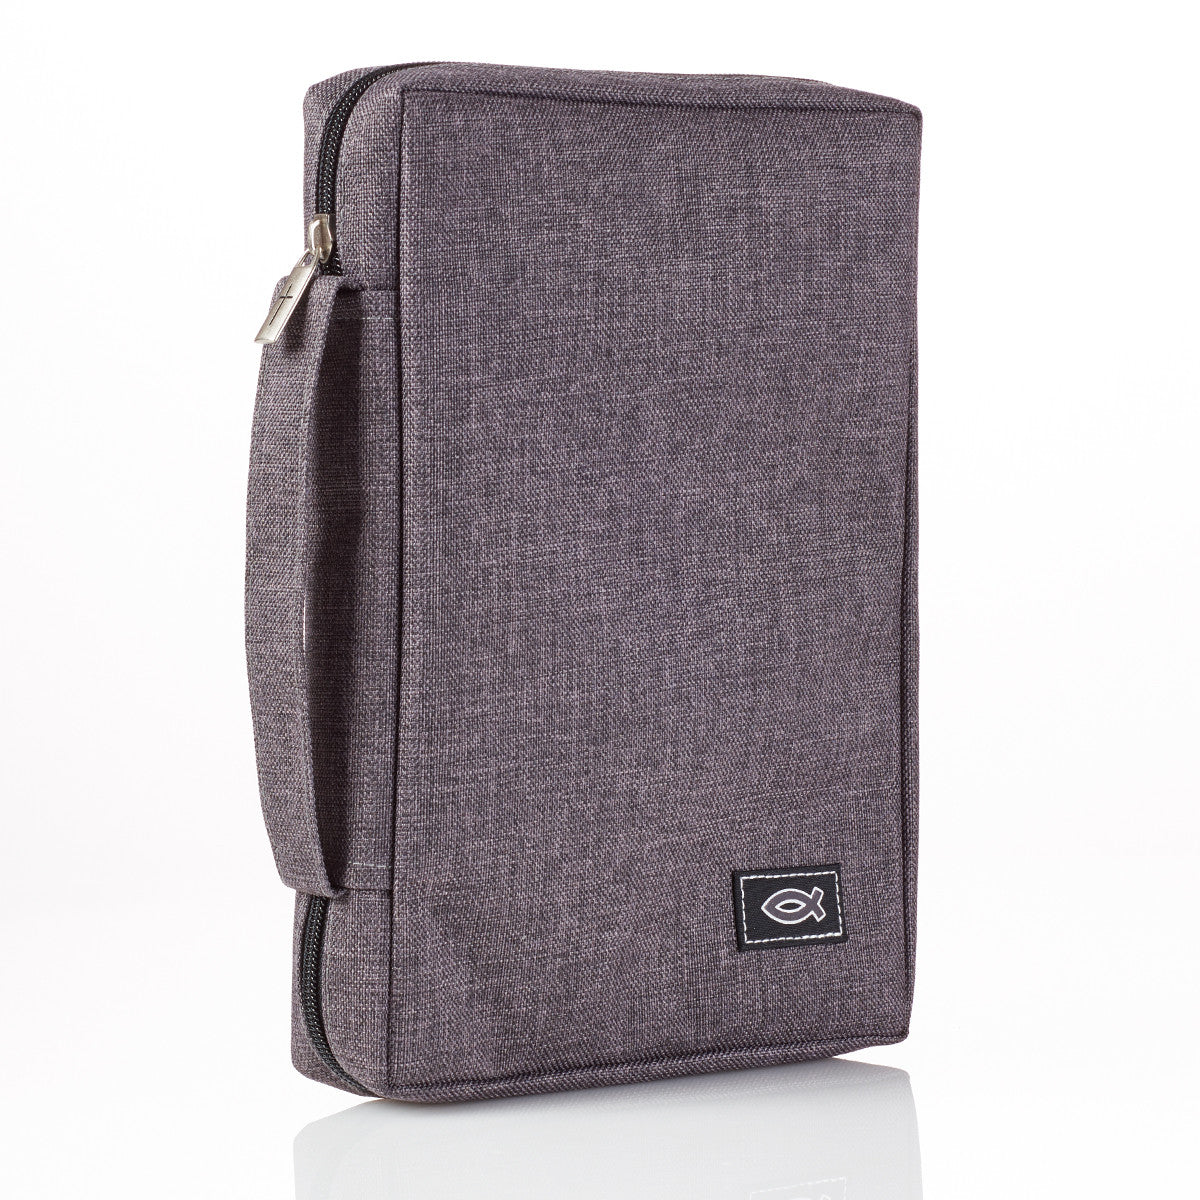 Gray Poly-canvas Bible Cover with Ichthus Fish Badge